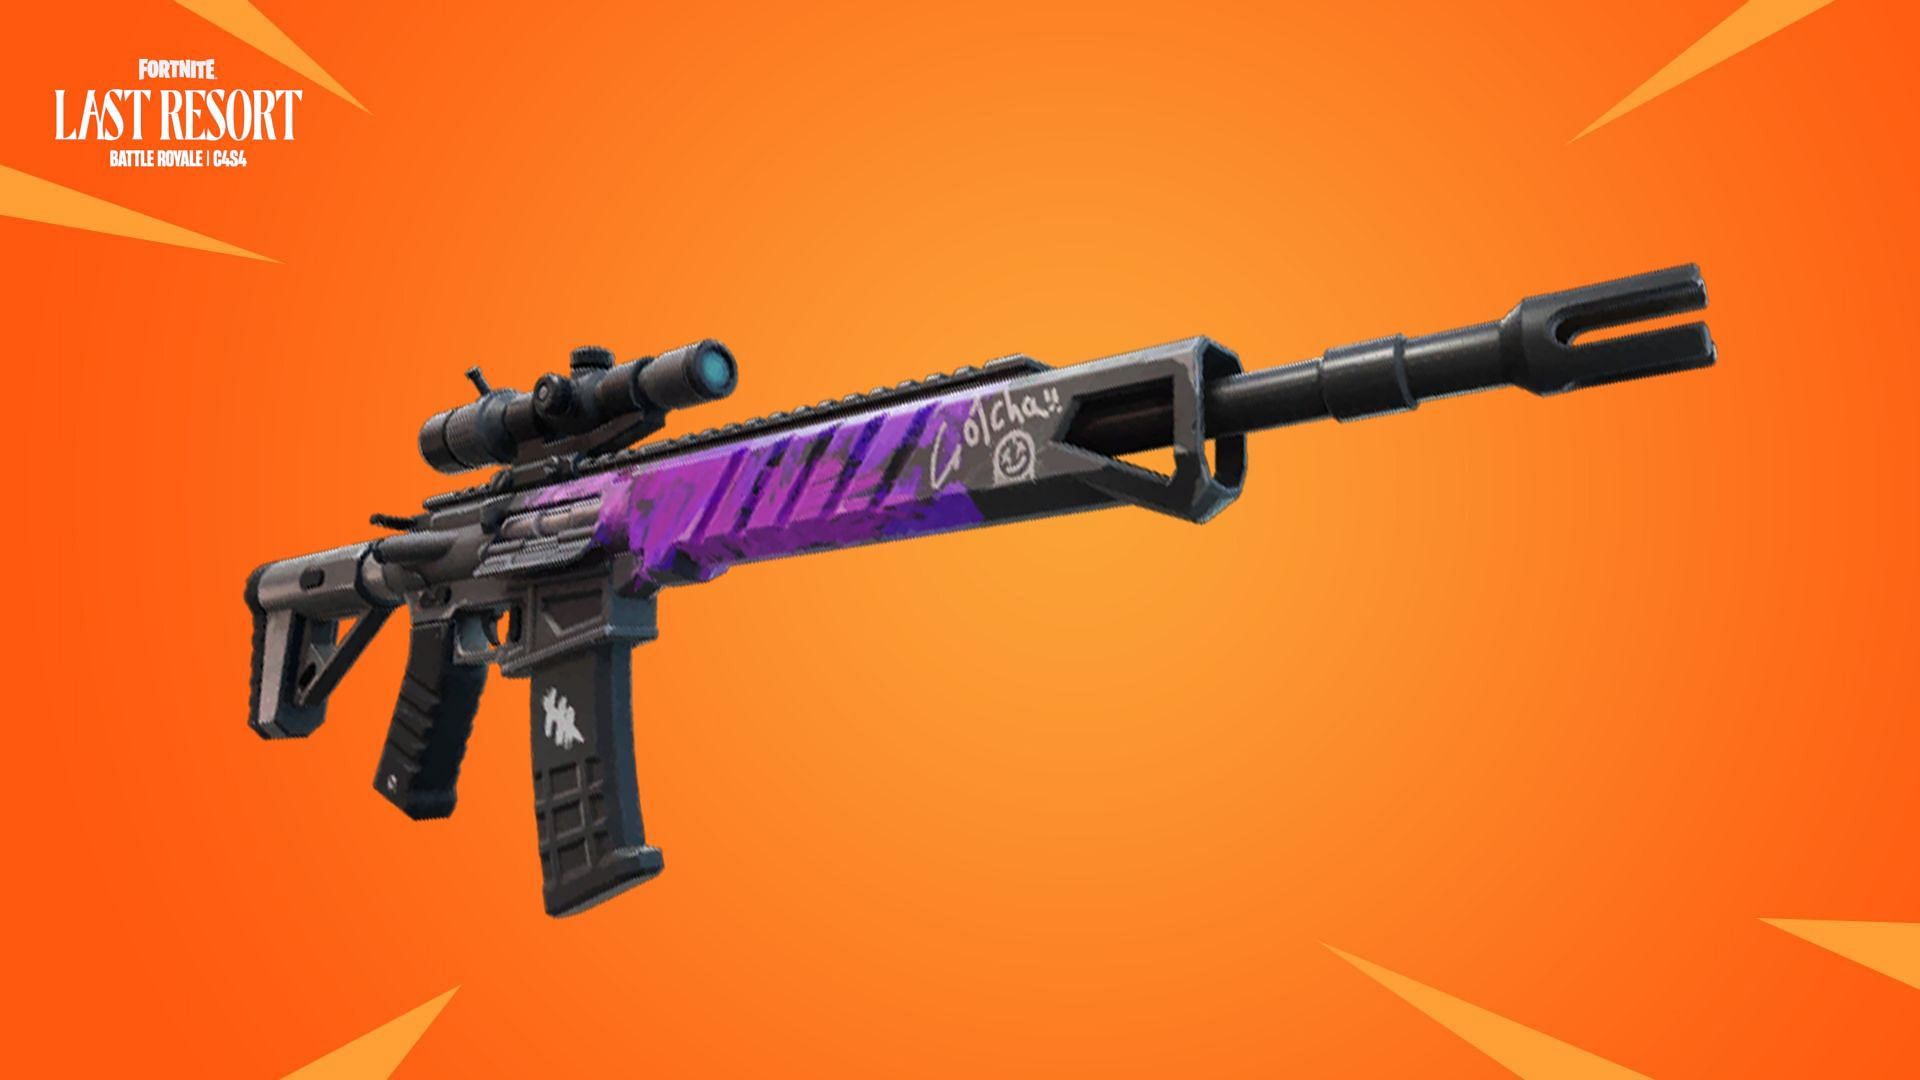 The Tactical DMR and Vampire Shotgun will be added to the loot pool soon (Image via Epic Games/Fortnite)